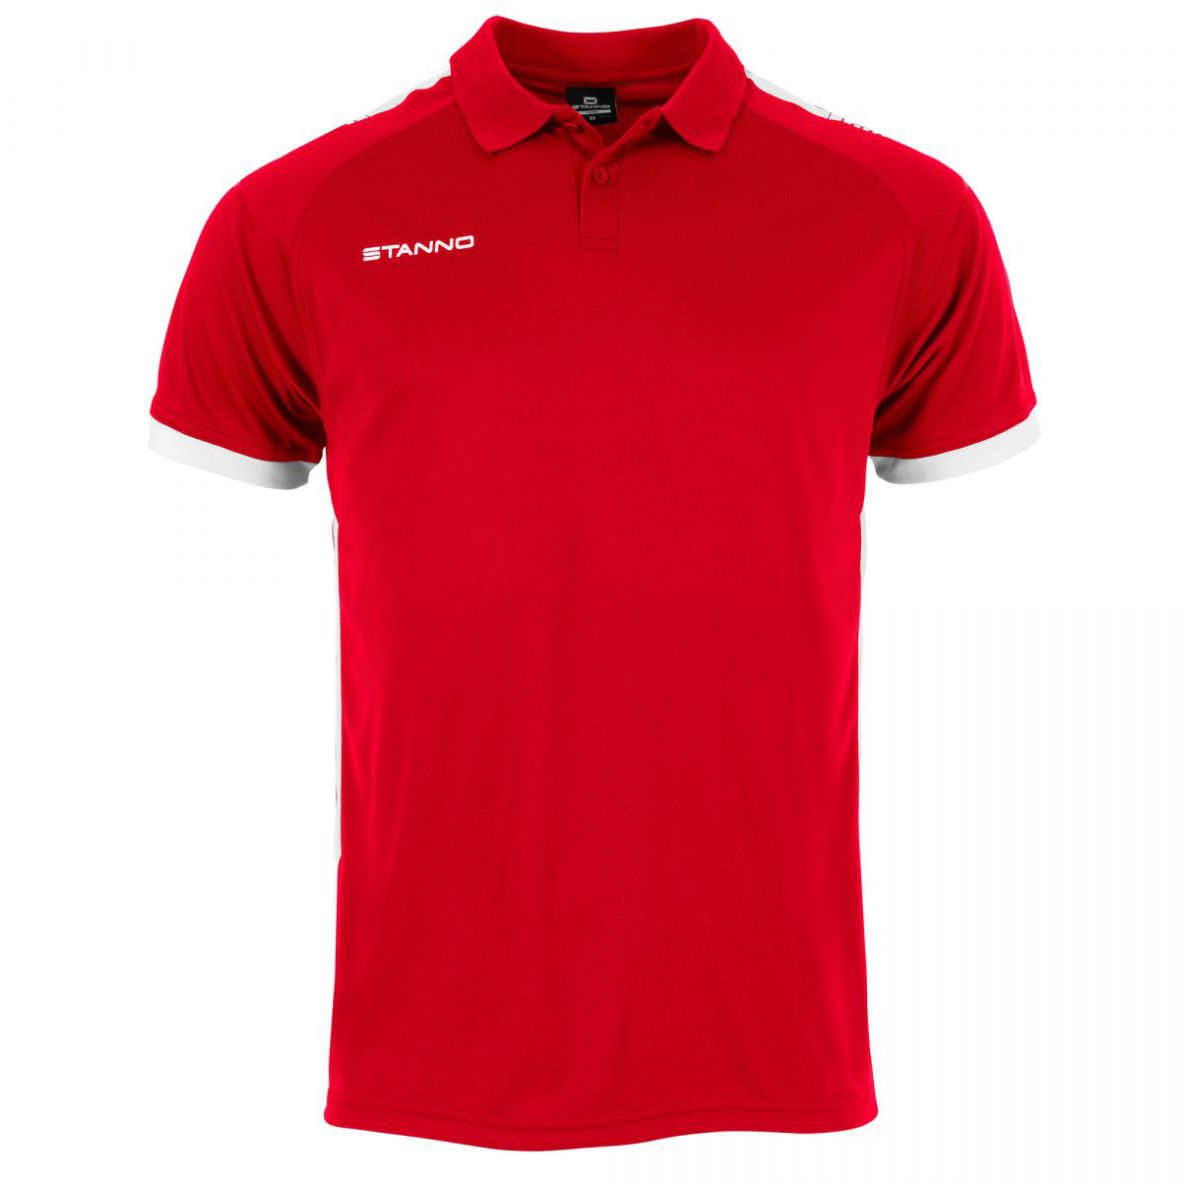 Stanno - First Polo - Red